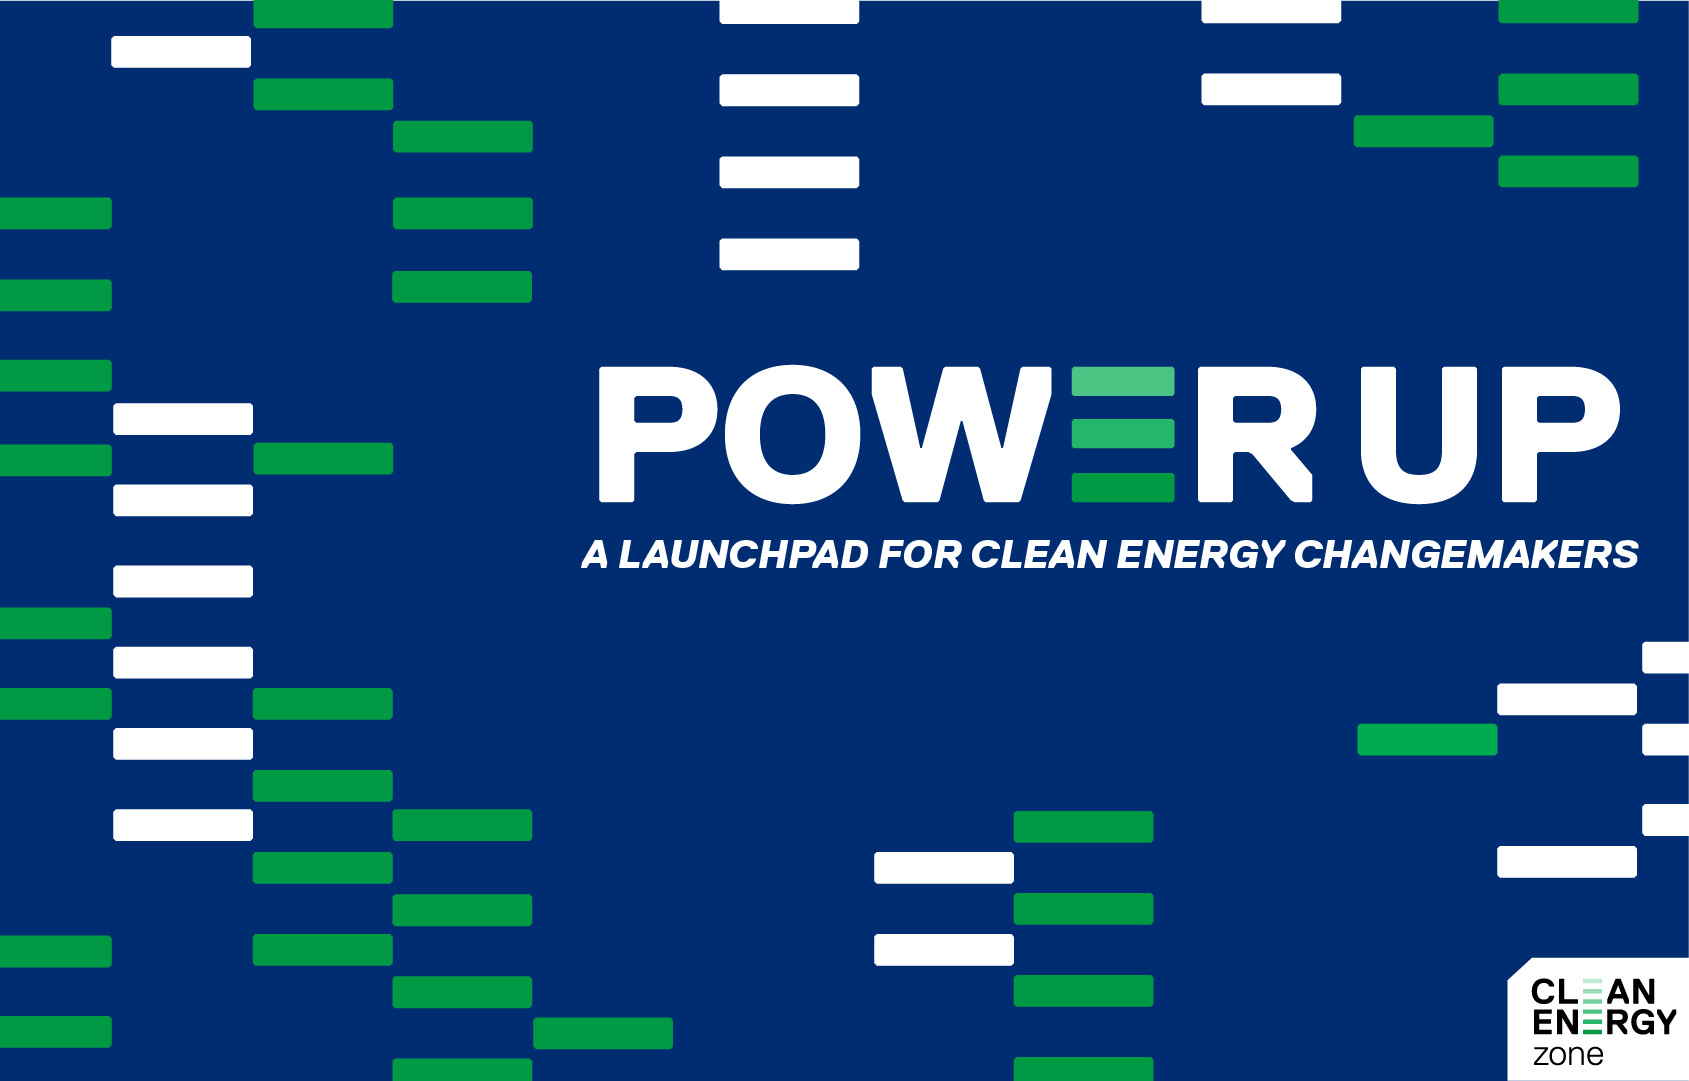 Power Up: A Launchpad for Clean Energy Changemakers